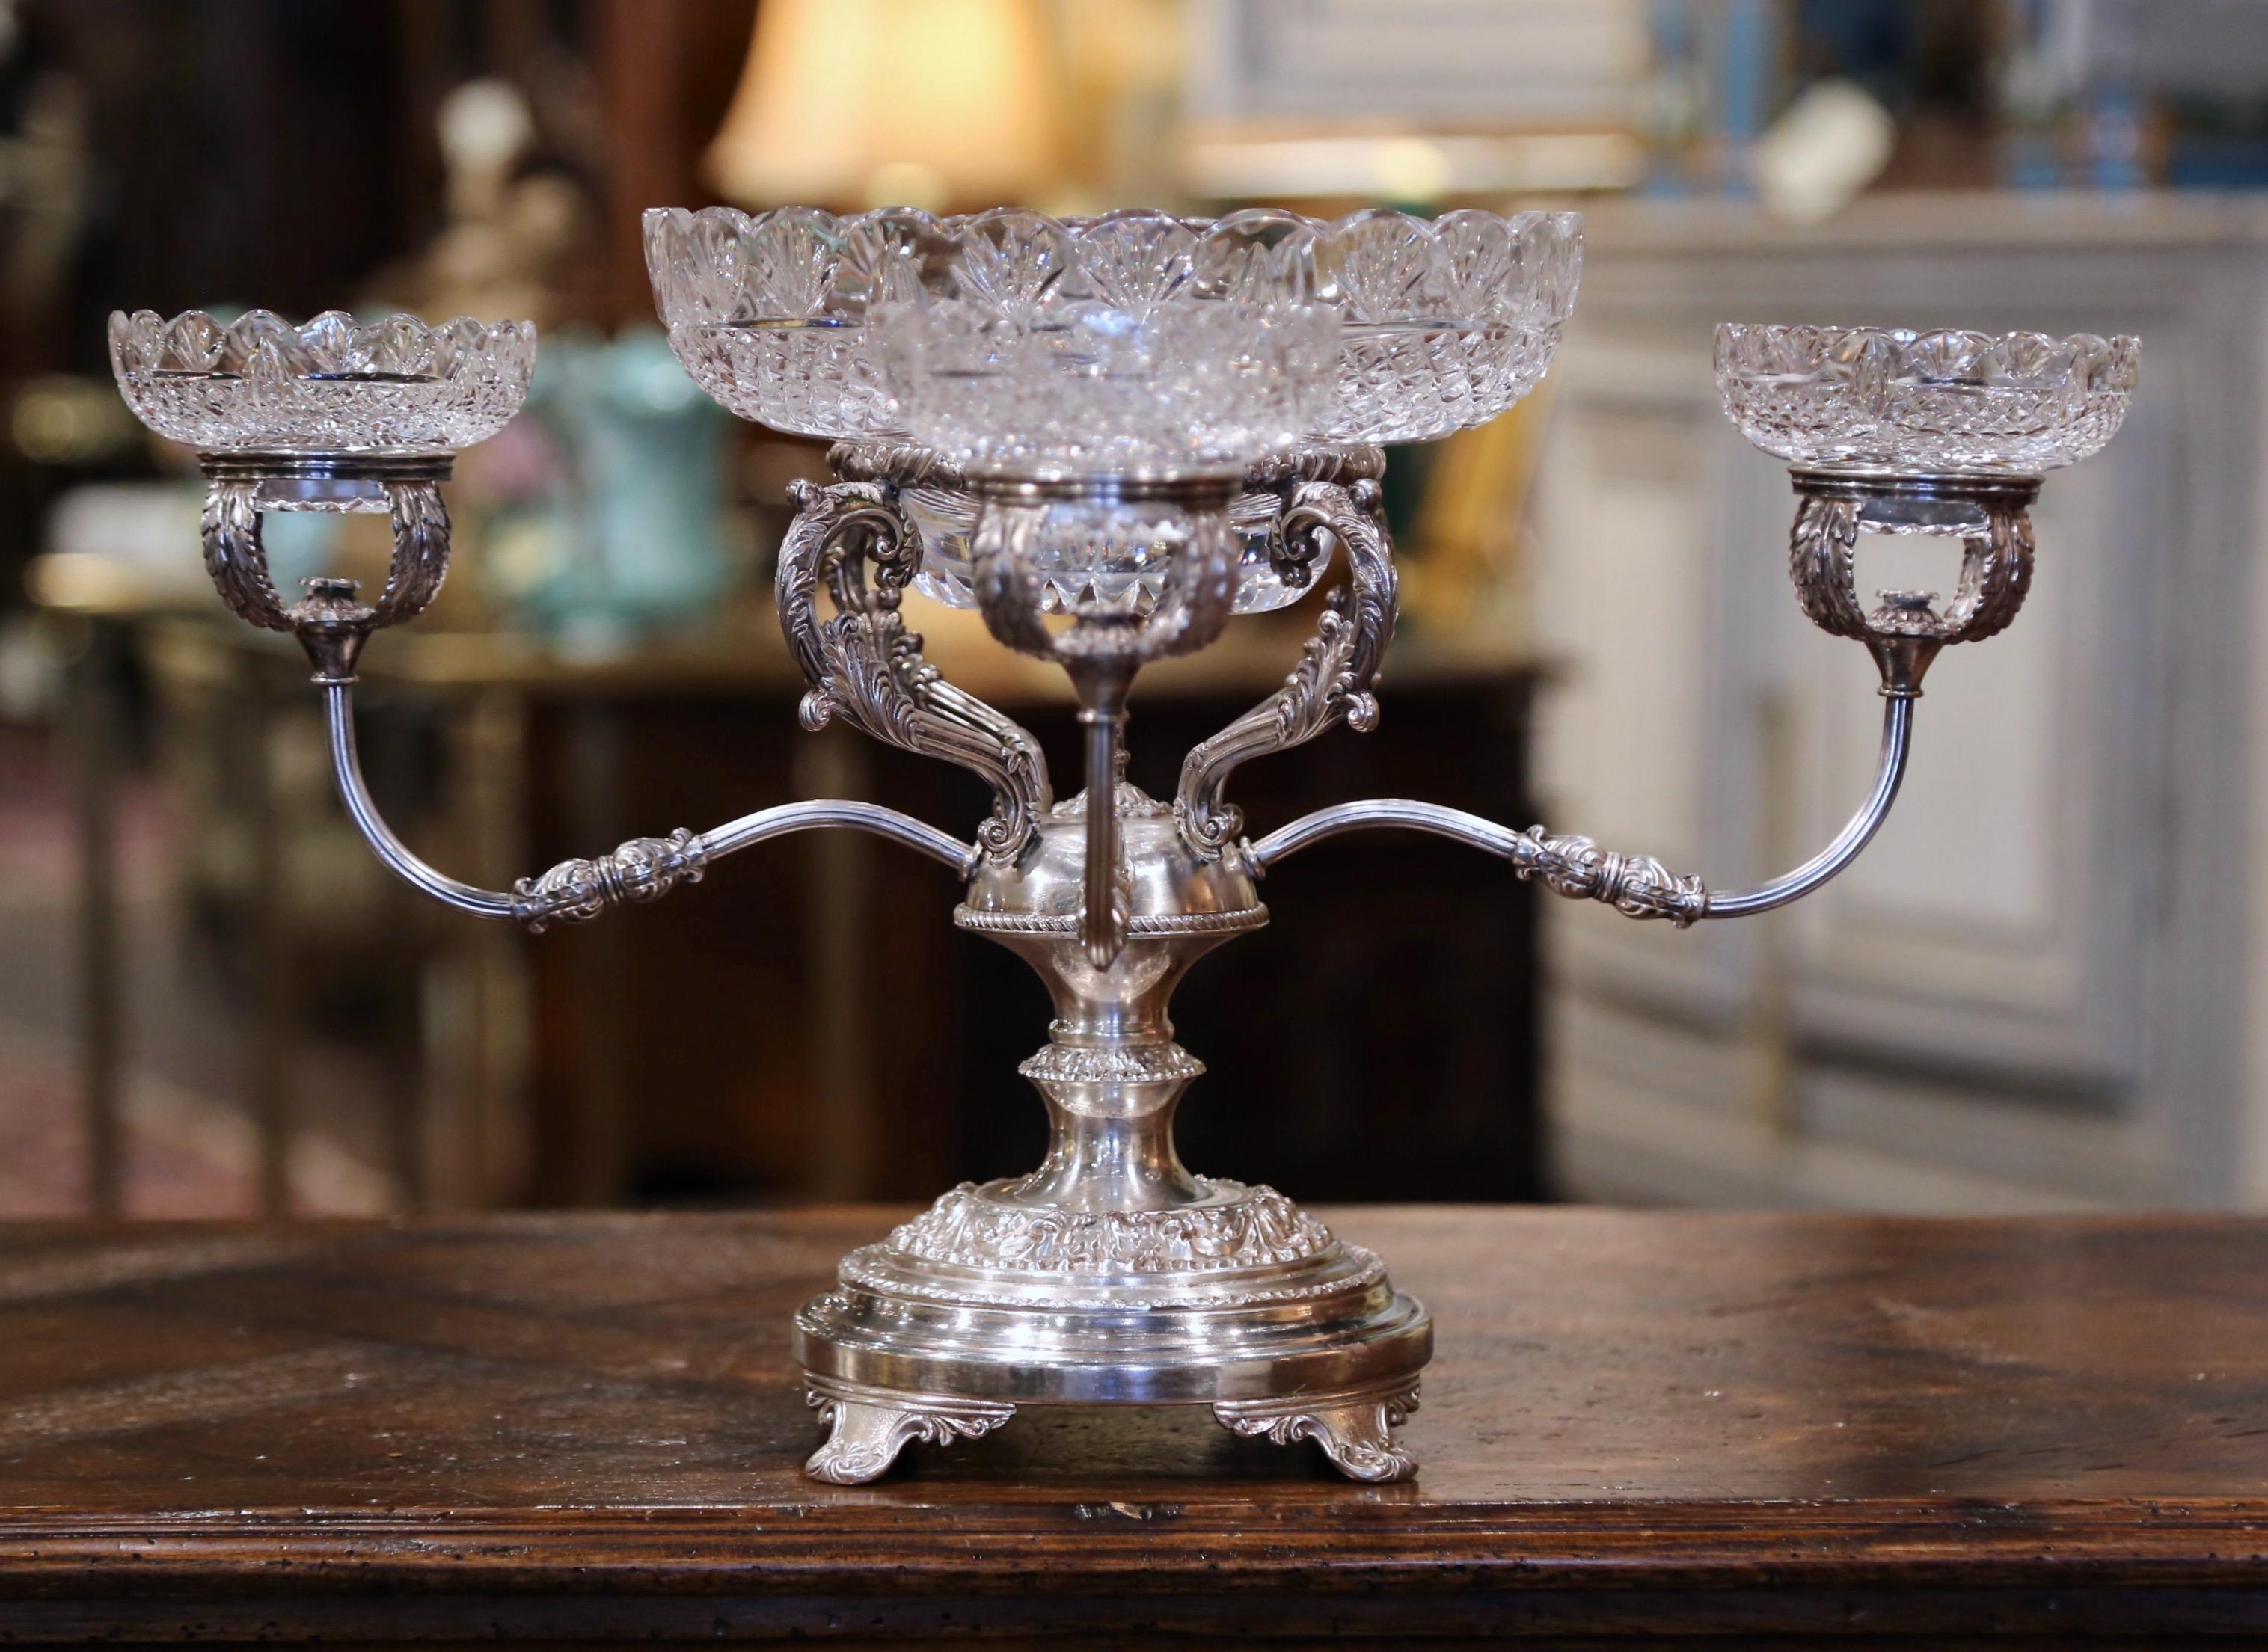 This elegant five-bowl antique epergne was created in England, circa 1890. Made of copper with silver plated, the centerpiece stands on four scrolled feet decorated with shell motifs over a round base embellished with repousse foliage decor. The